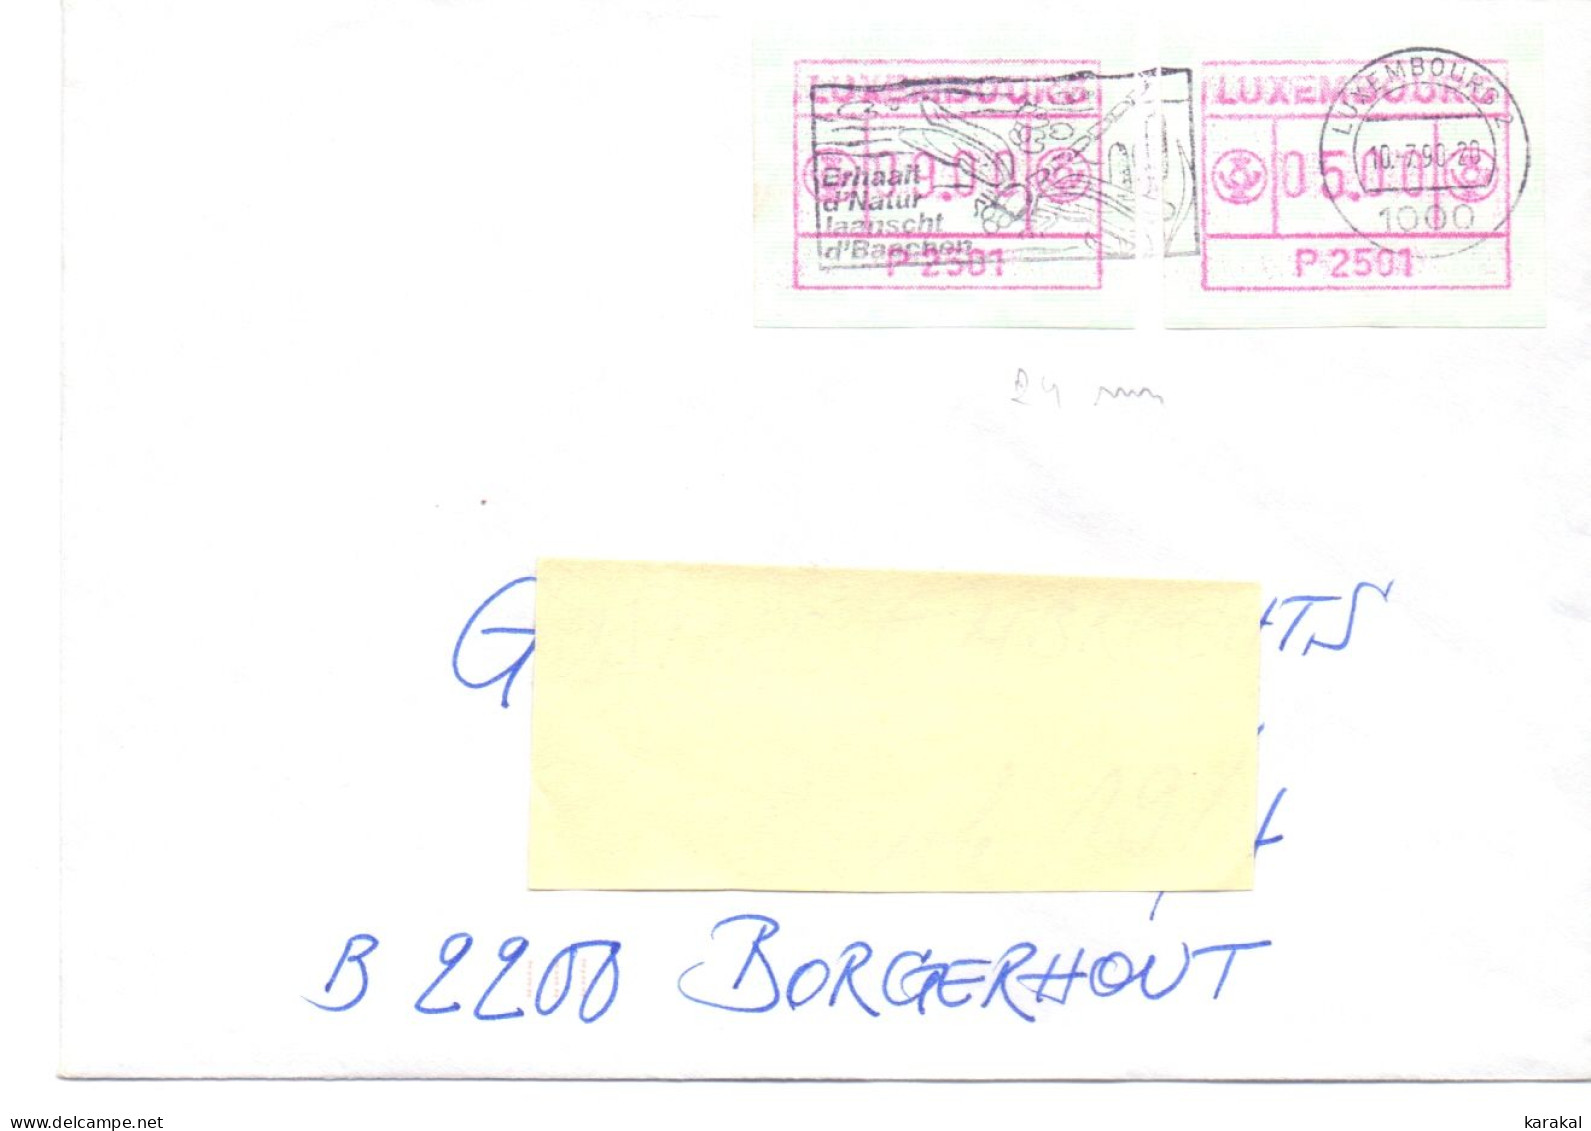 Luxembourg ATM Frama MiNr. 1.1 P2501 Firefly Libellule On Circulated Letter To Borgerhout Belgium 1990 - Vignettes D'affranchissement